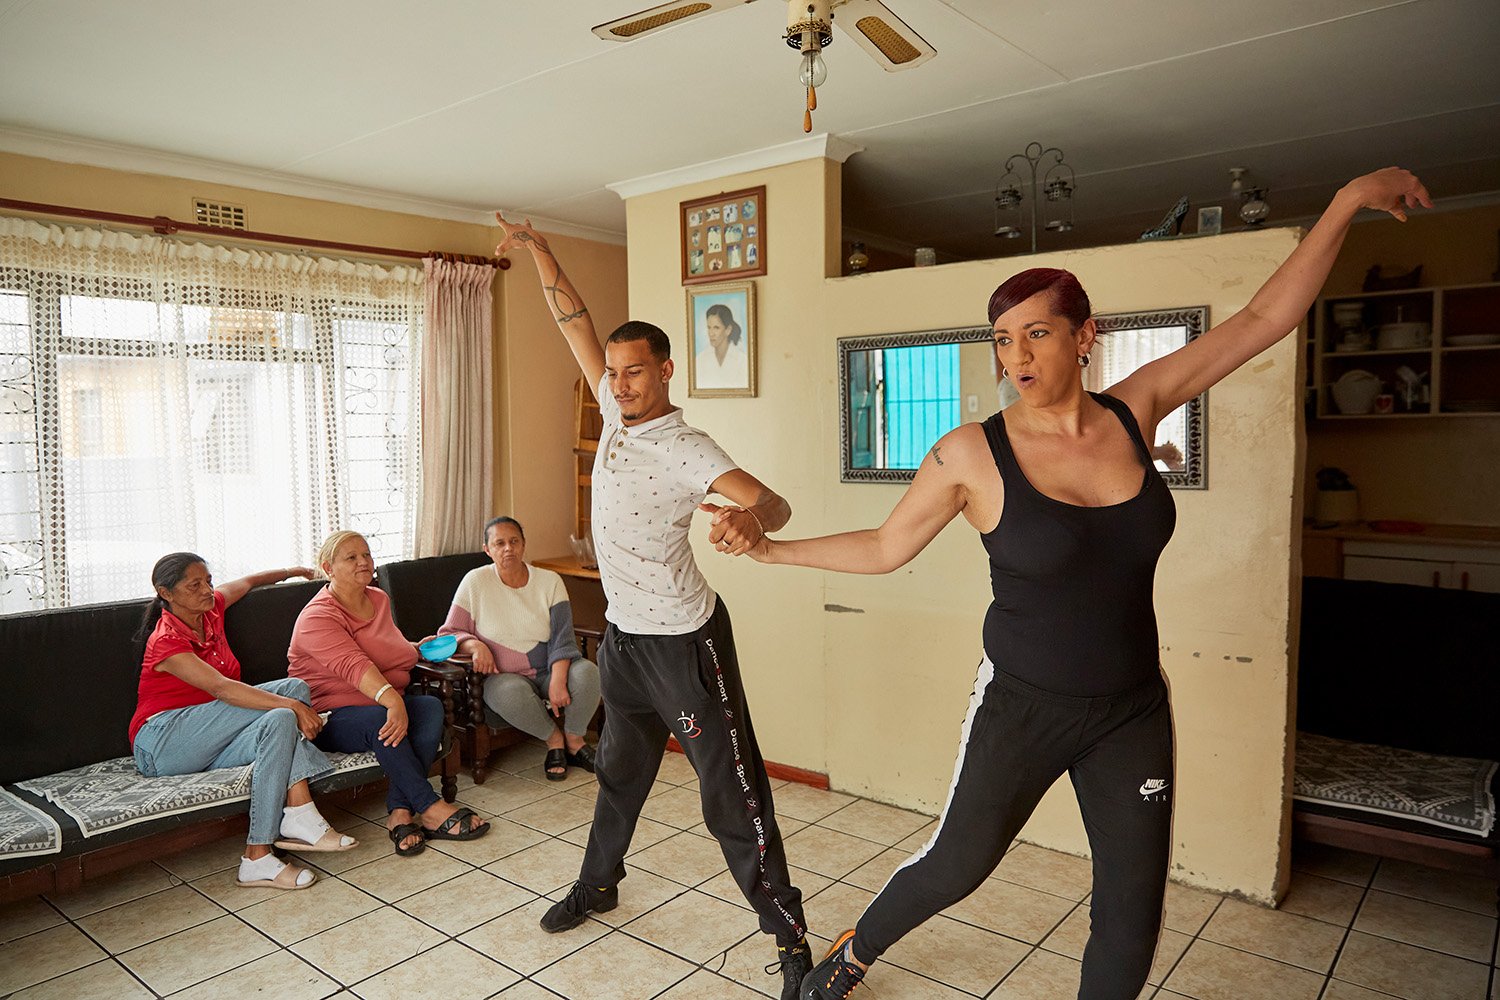  Chedino rehearses a dance routine with her dance partner, Shane, in the living room of her aunt Michelle (second from left), Belville, 2022.  